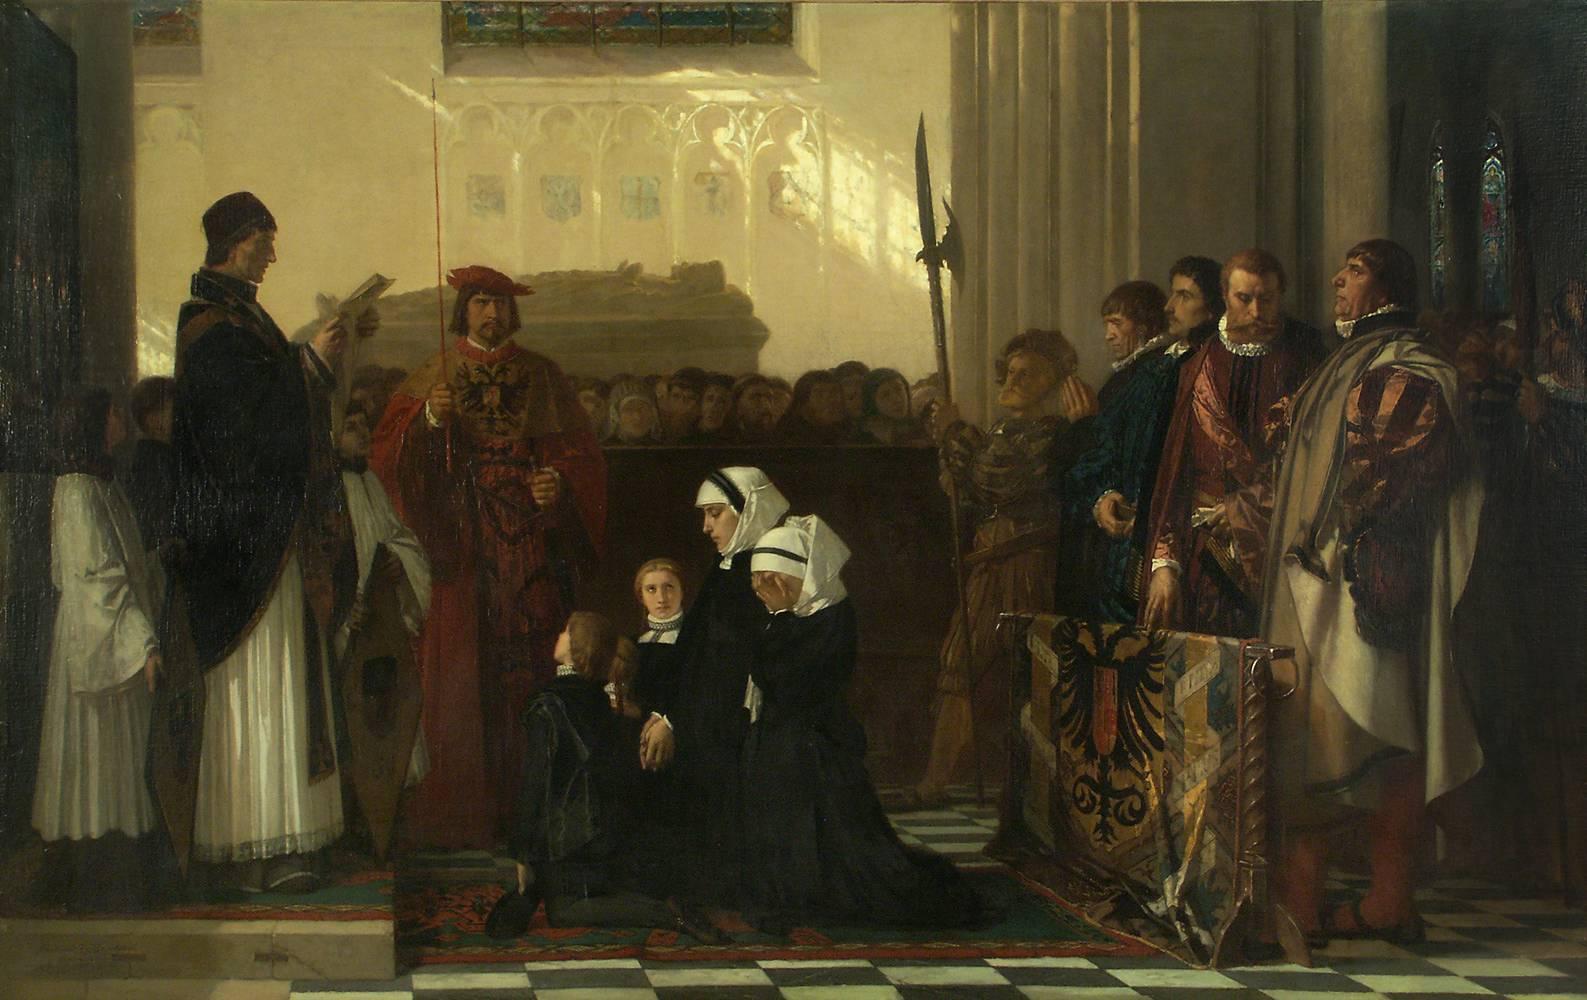 Ferdinand de Braekeleer (1792-1883). Depicting a woman and children in cathedral interior, where she is being striped of her property and titles. This scene is portraying an incident that would have occurred 300 hundred years earlier during the